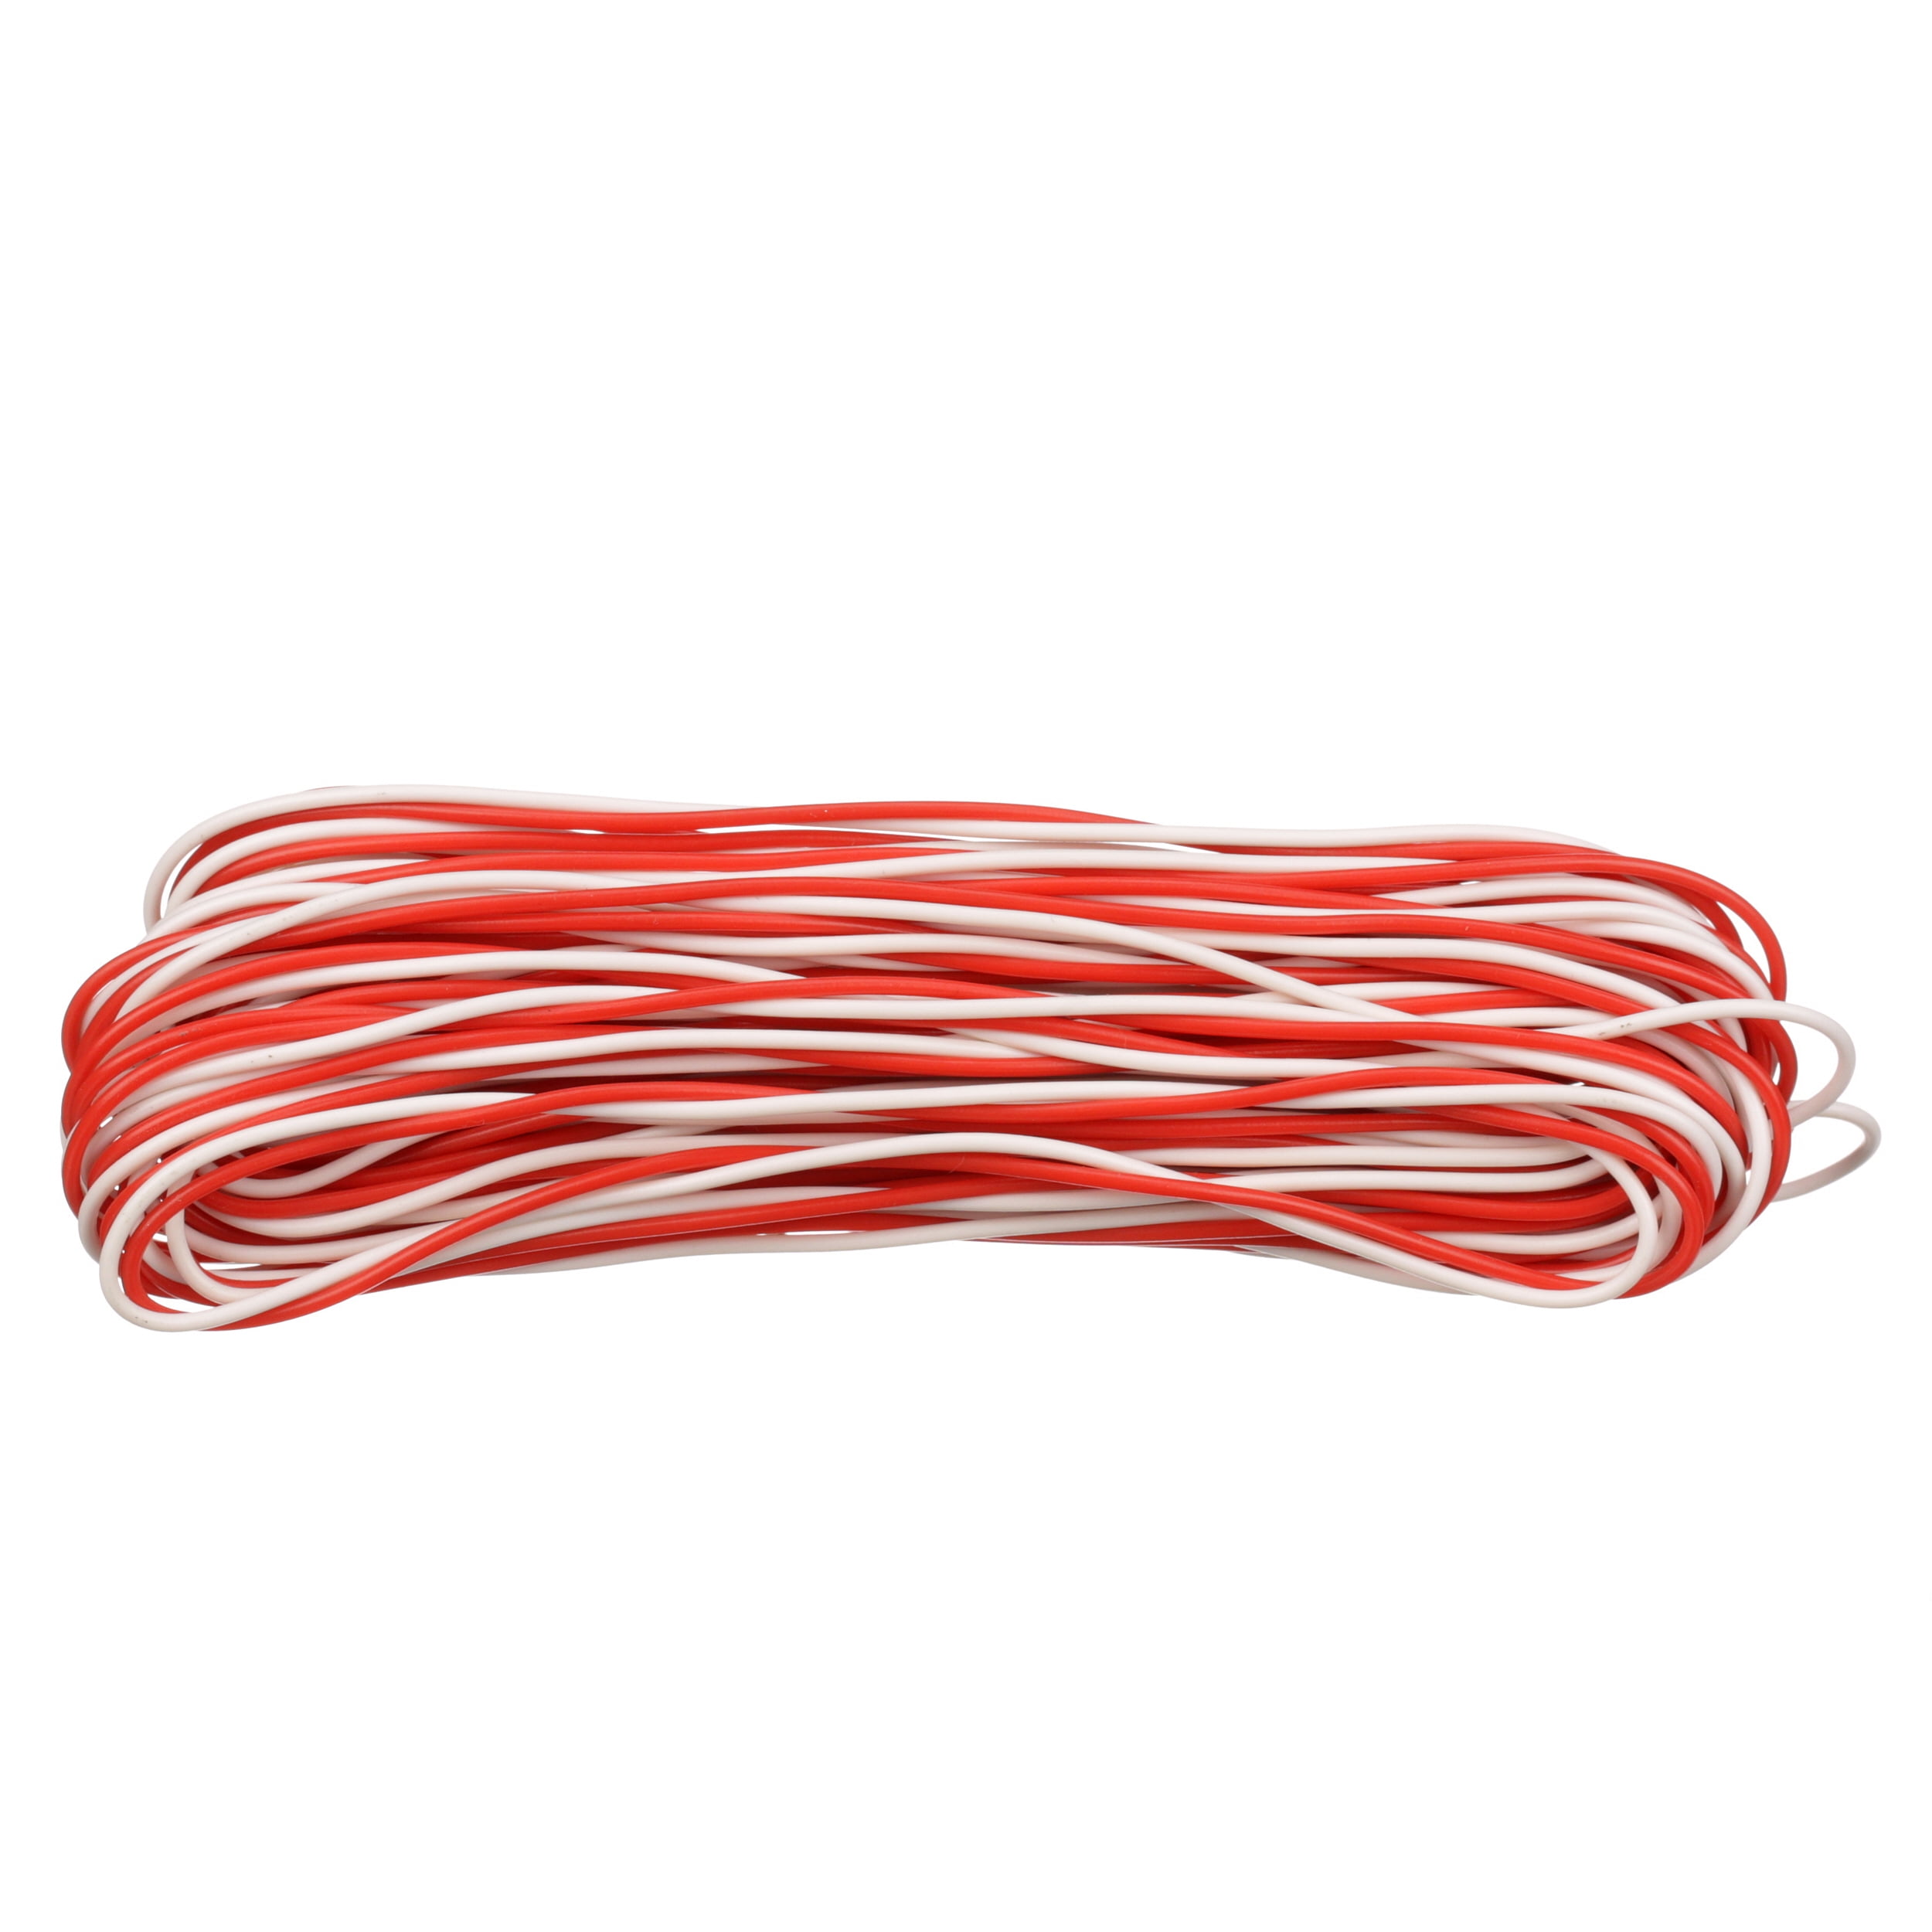 Woods 0452 Bell Wire, 25', Red And White 